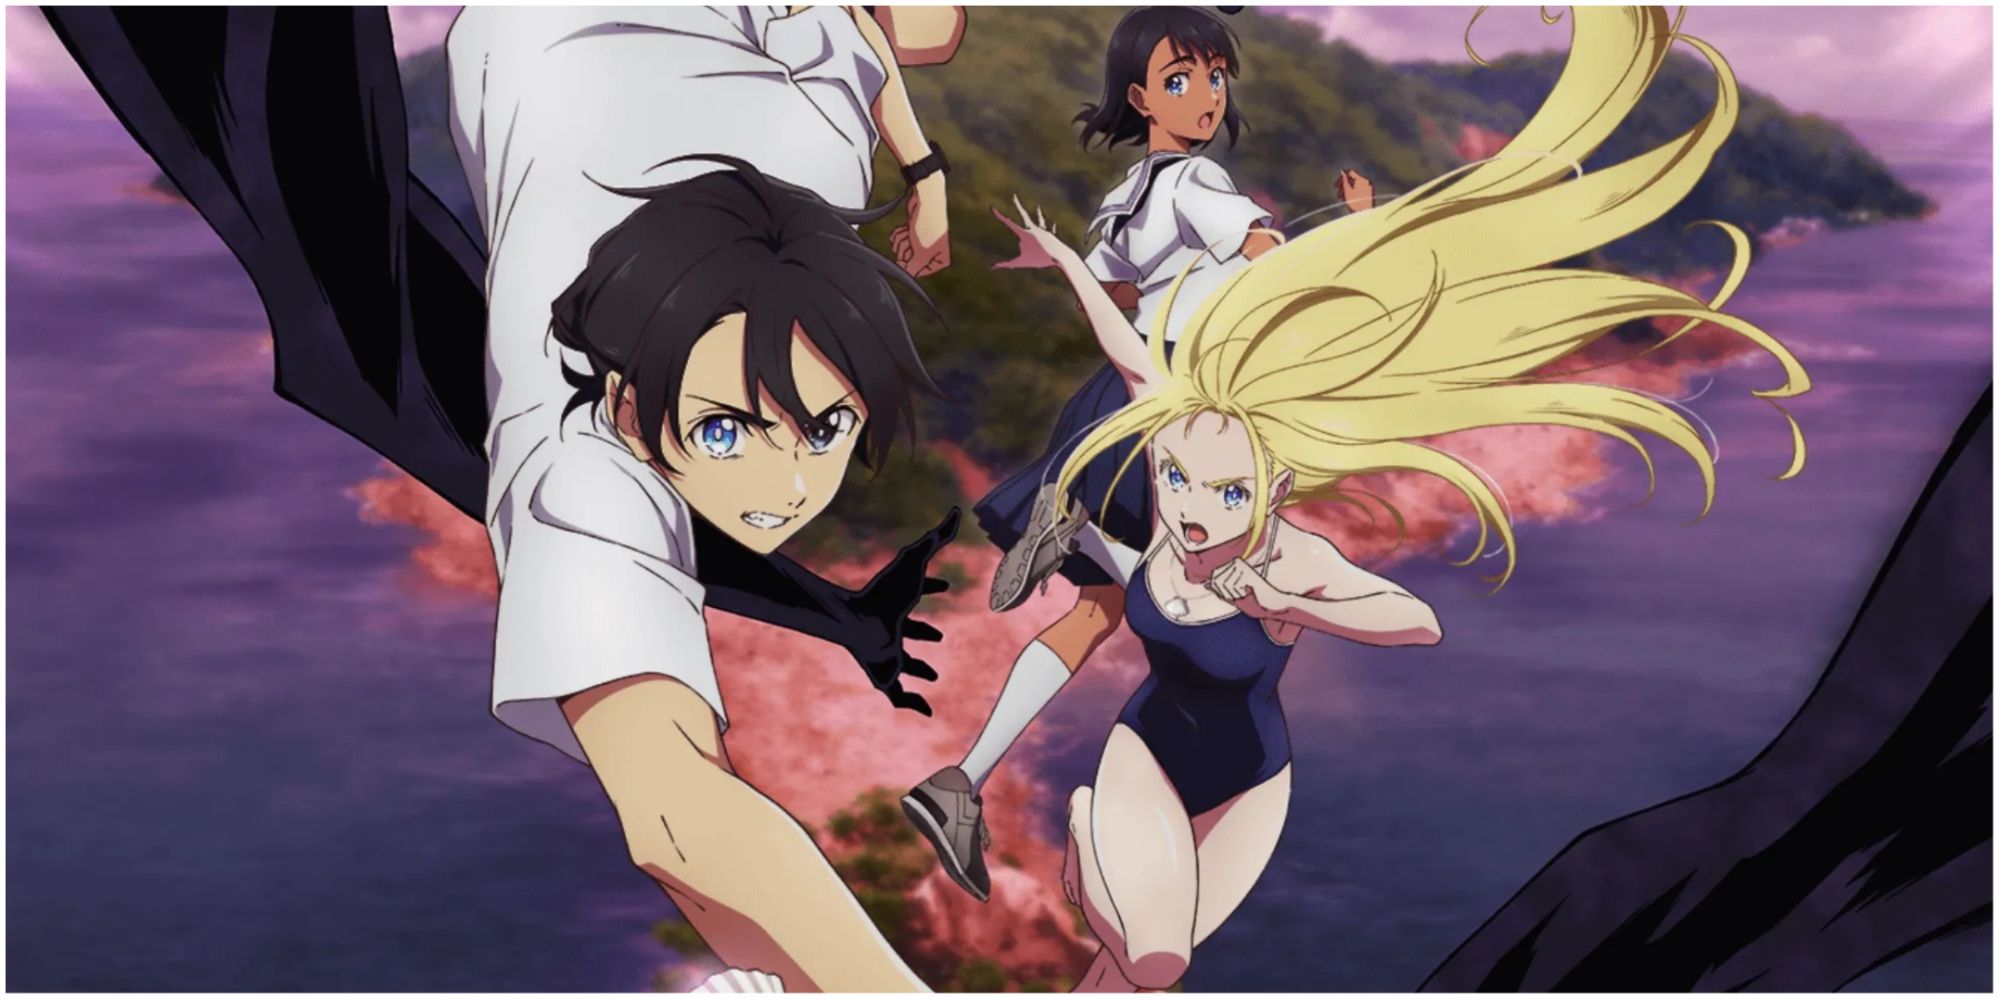 Banner for Summer Time Rendering, from the key visual